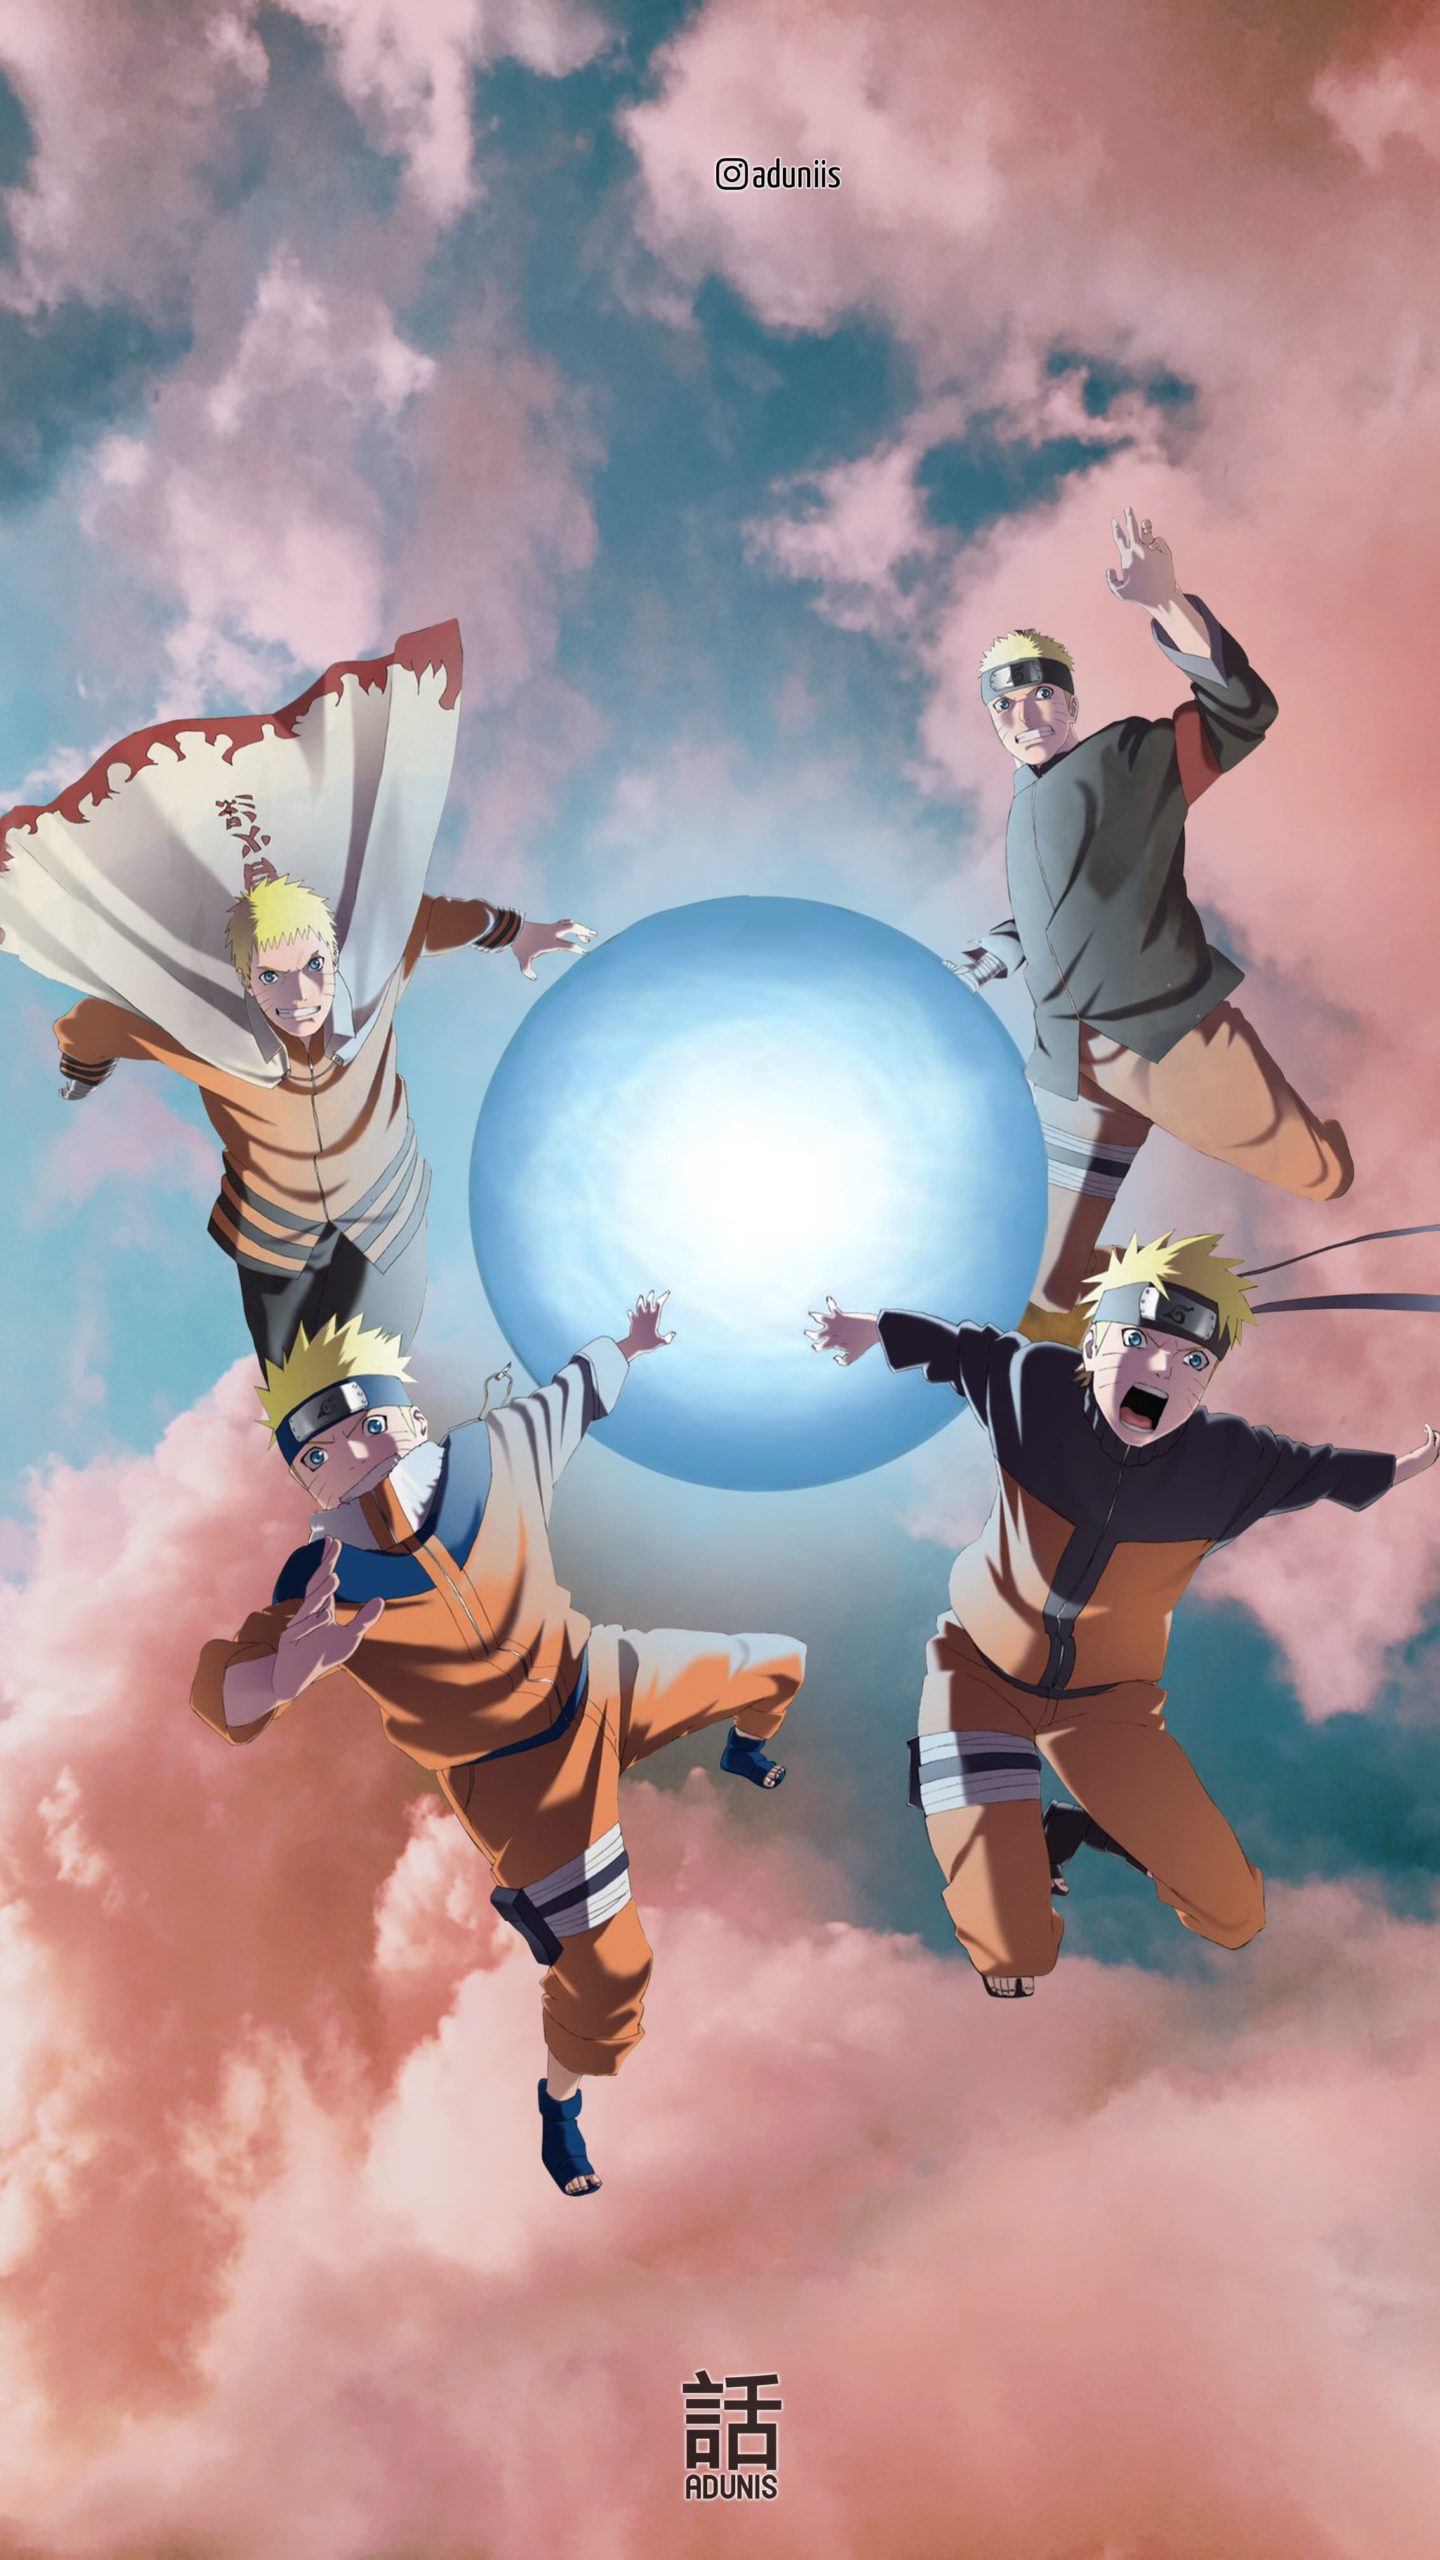 Naruto Shippuden iPhone Wallpapers  Top Free Naruto Shippuden iPhone  Backgrounds  WallpaperAccess  Naruto wallpaper iphone Anime Naruto  shippuden